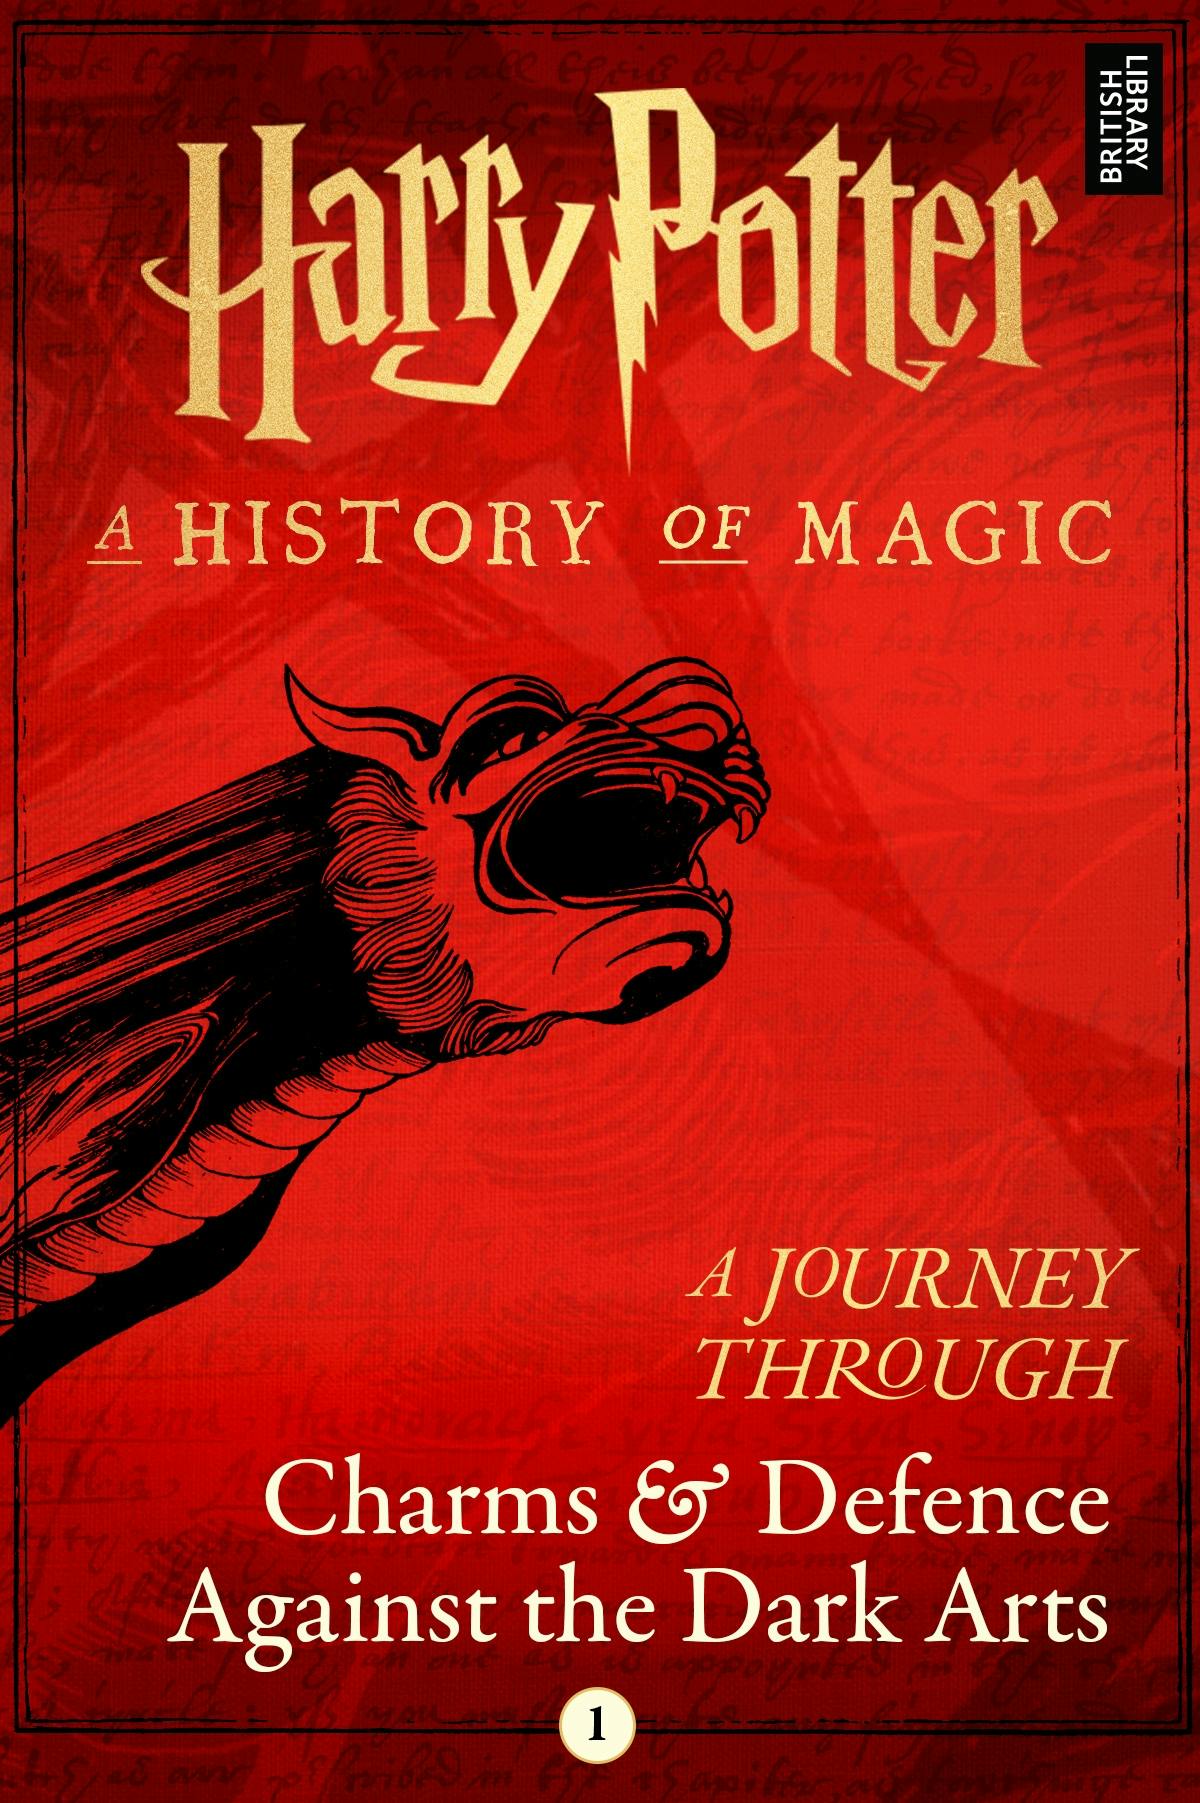 A Journey Through Charms and Defence Against the Dark Arts - undefined